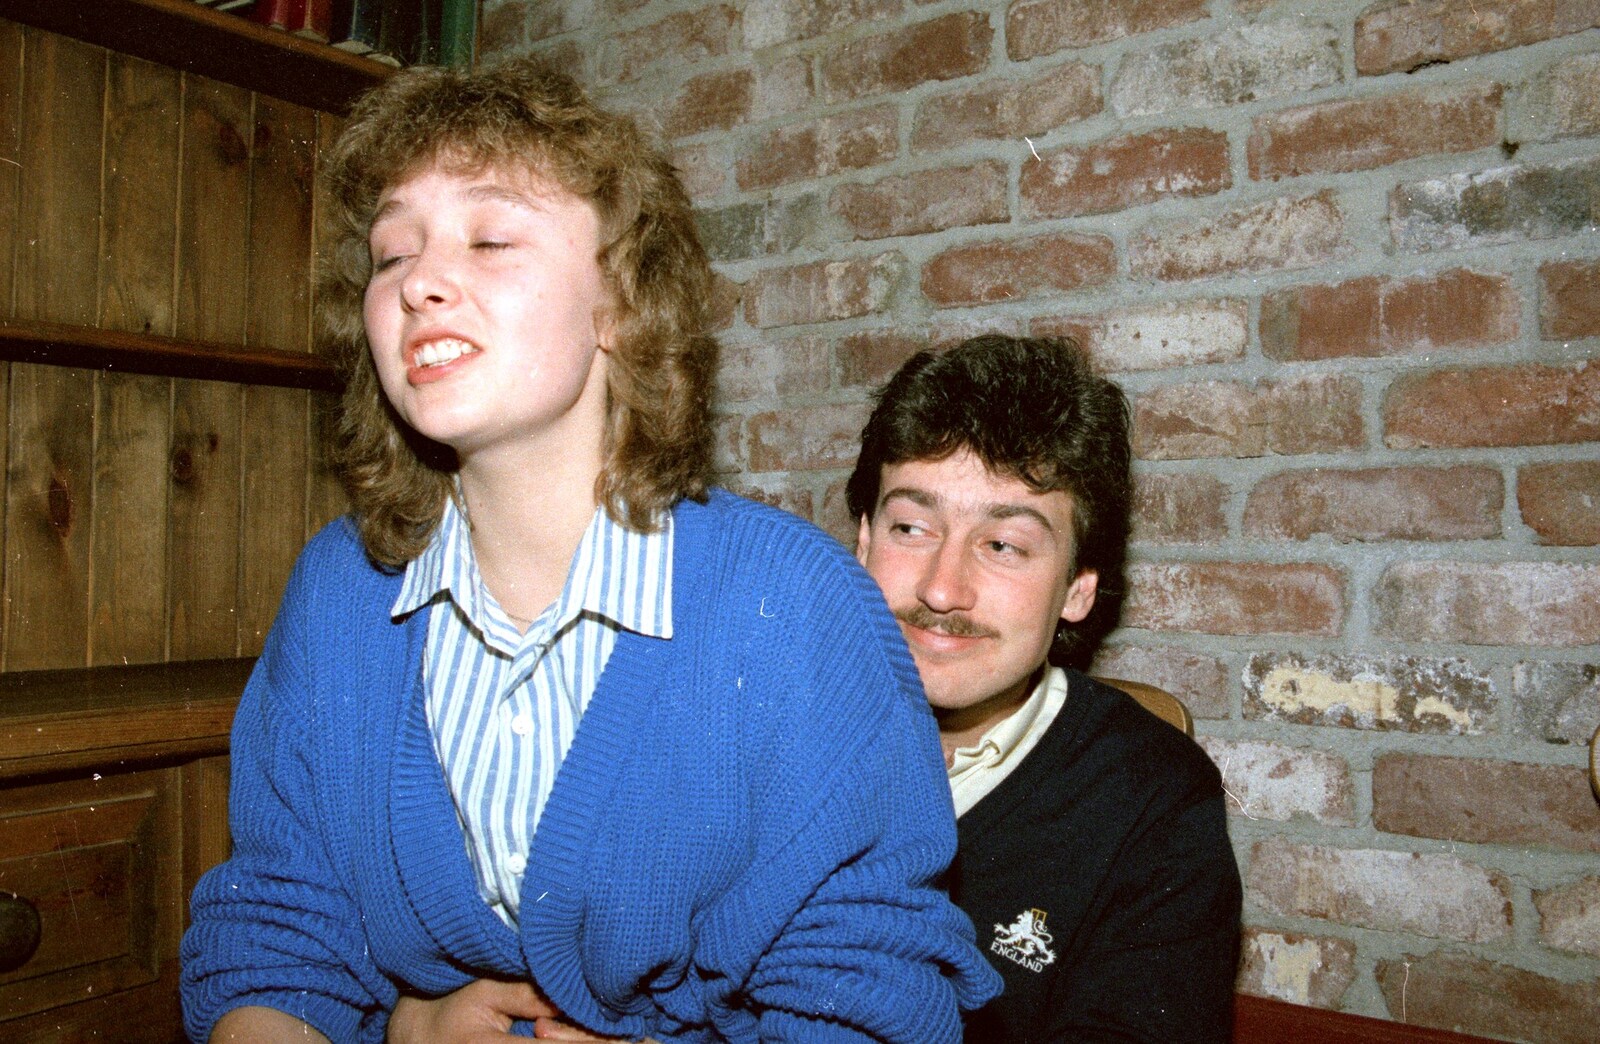 Uni: Gill Leaves the James Street Vaults, Plymouth - 30th May 1986: Mark Wilkins looks pleased with himself